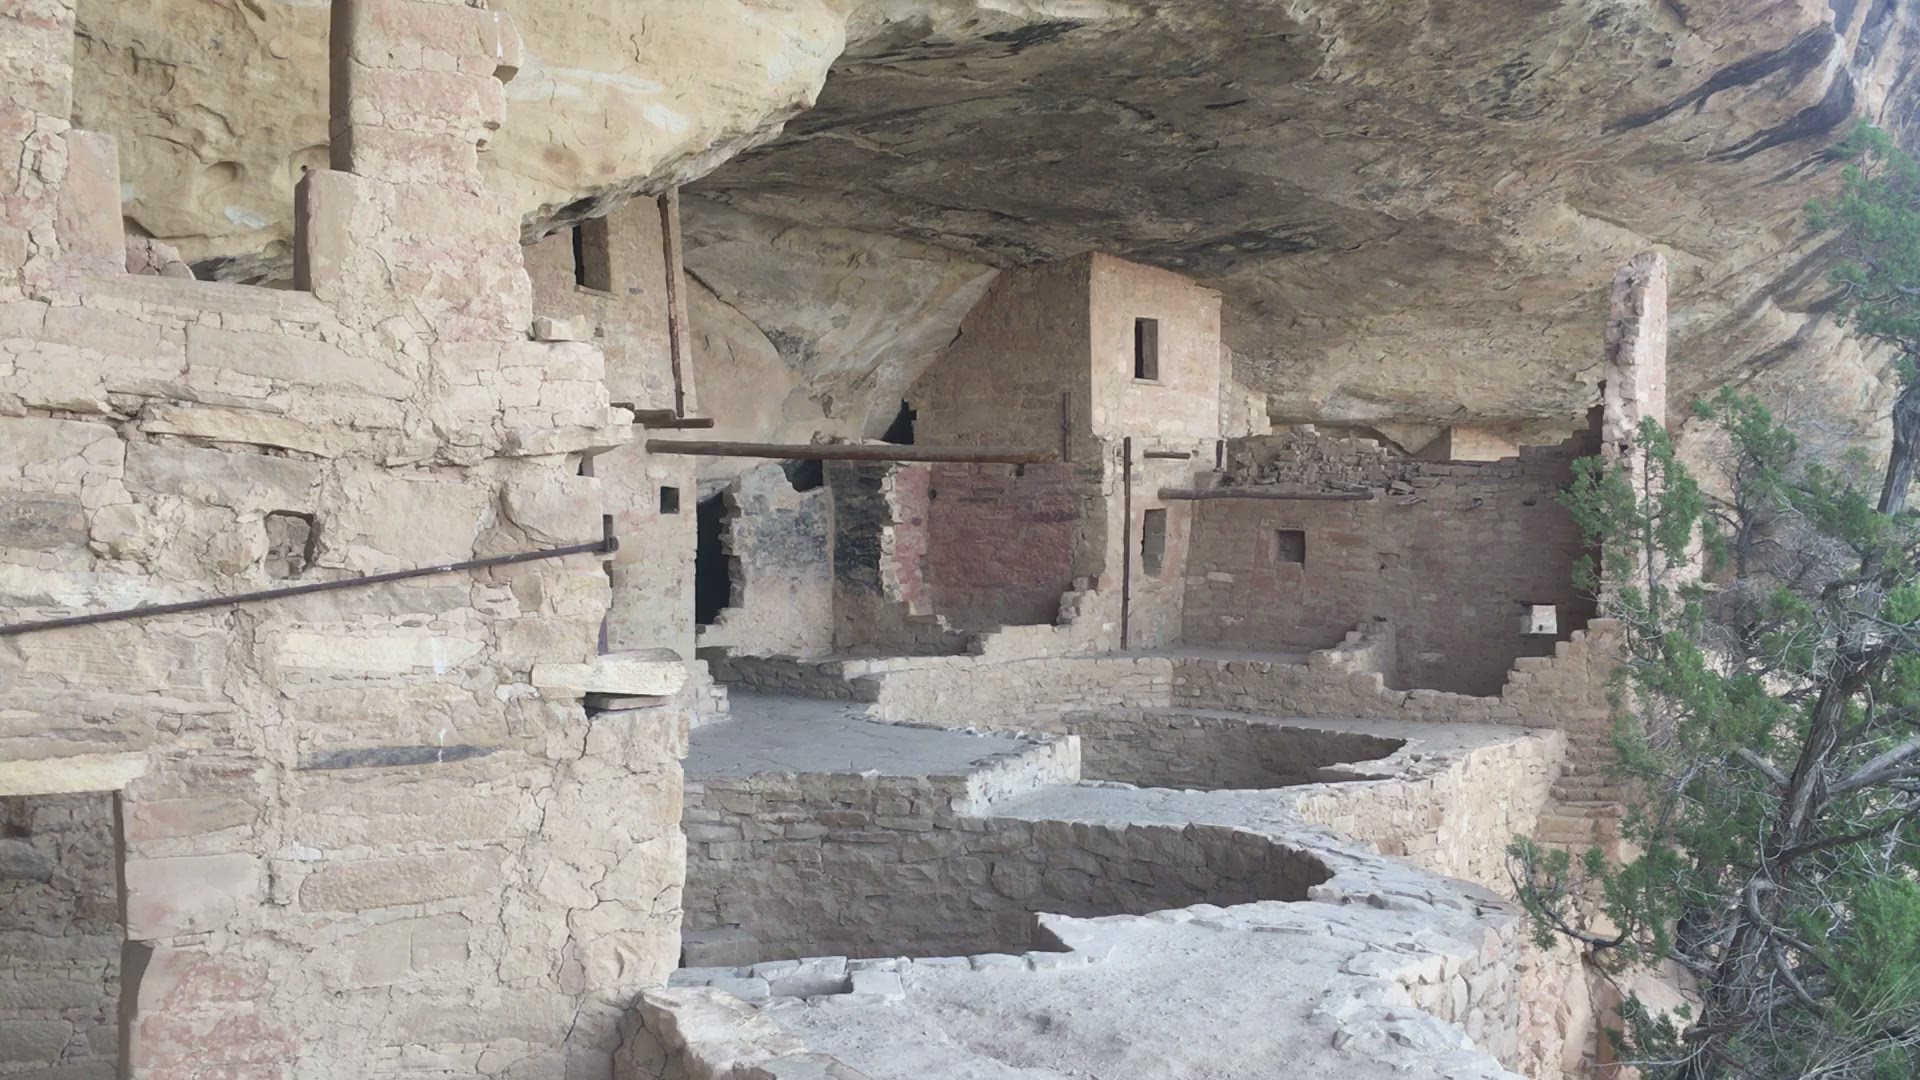 A view of the cliff dwellings at Balcony House inside Mesa Verde National Park in southwestern Colorado.